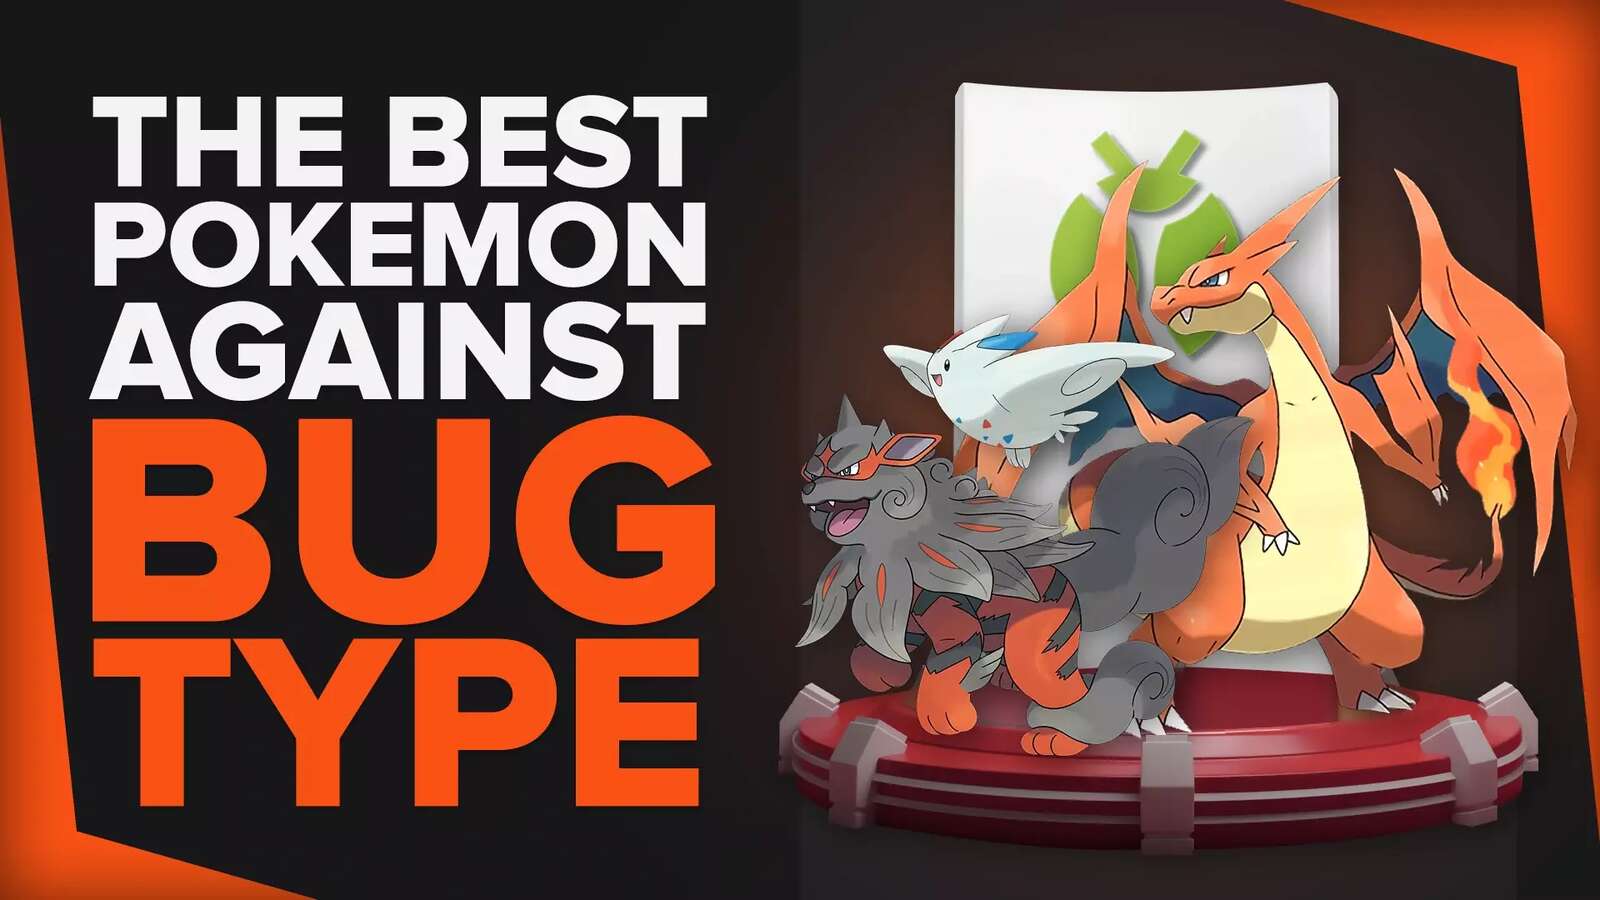 10 Pokemon That Are Best Against Bug Type [Ranked]